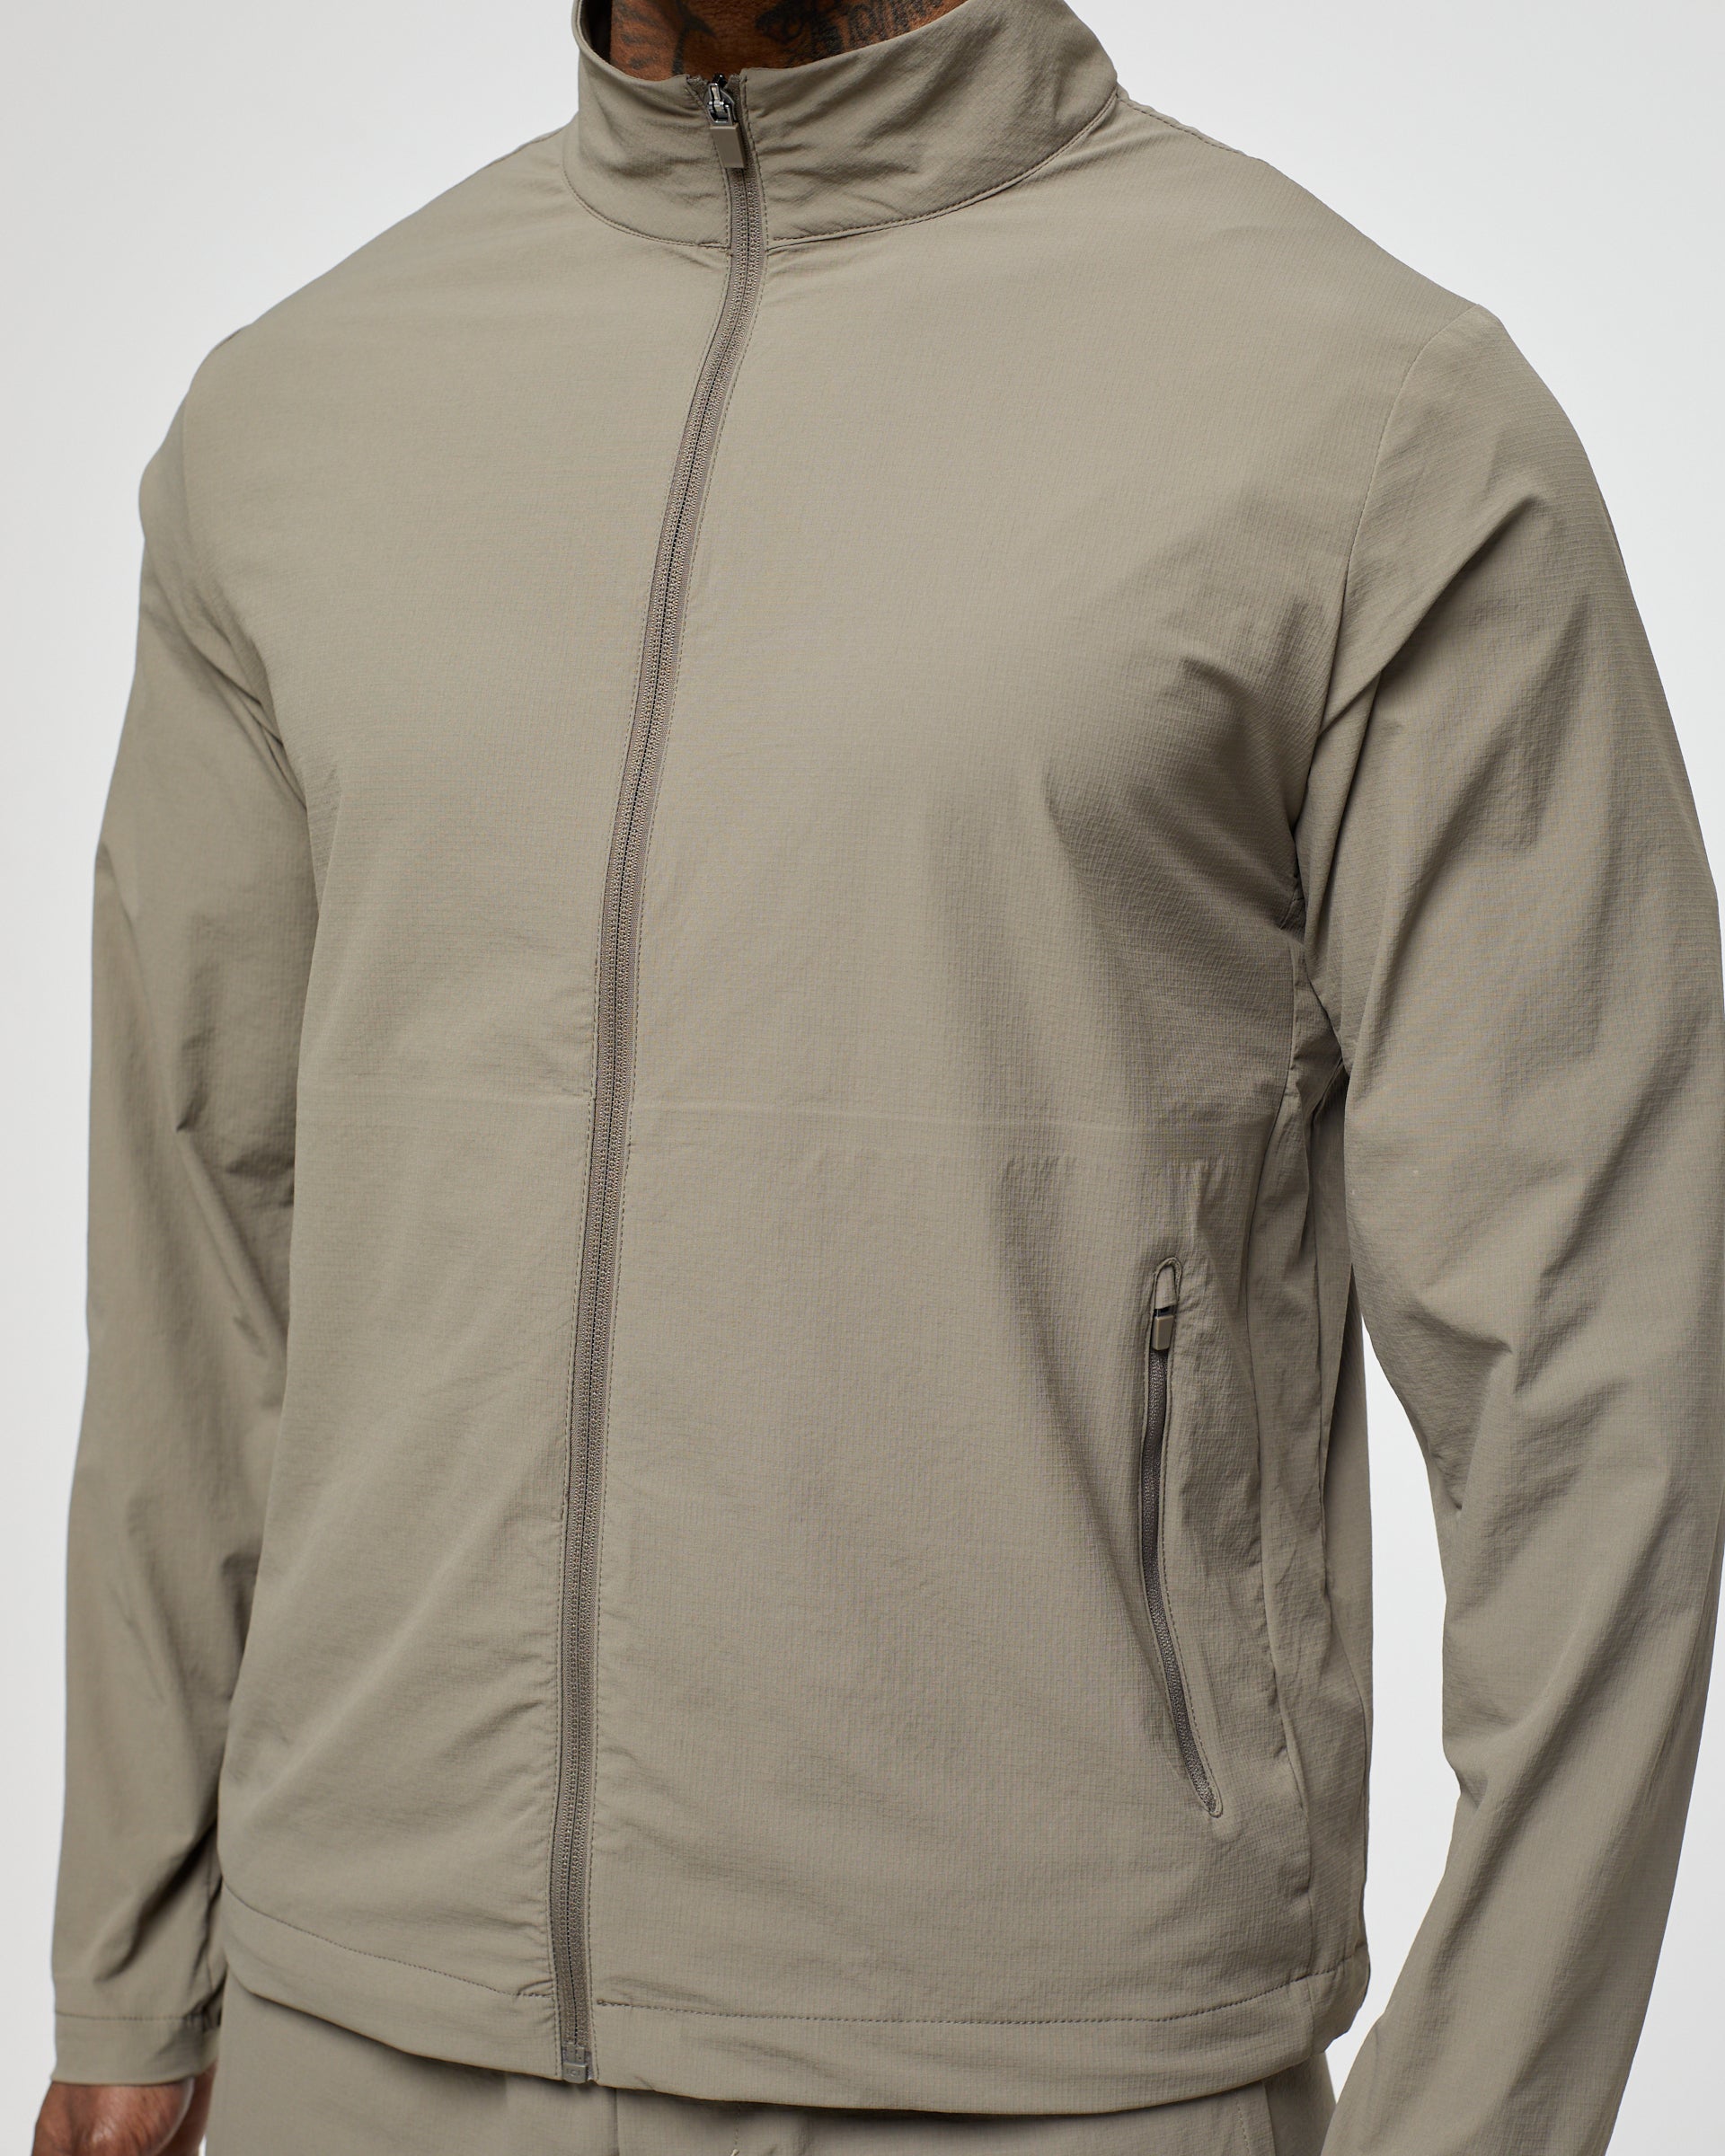 CORE JACKET - TAUPE